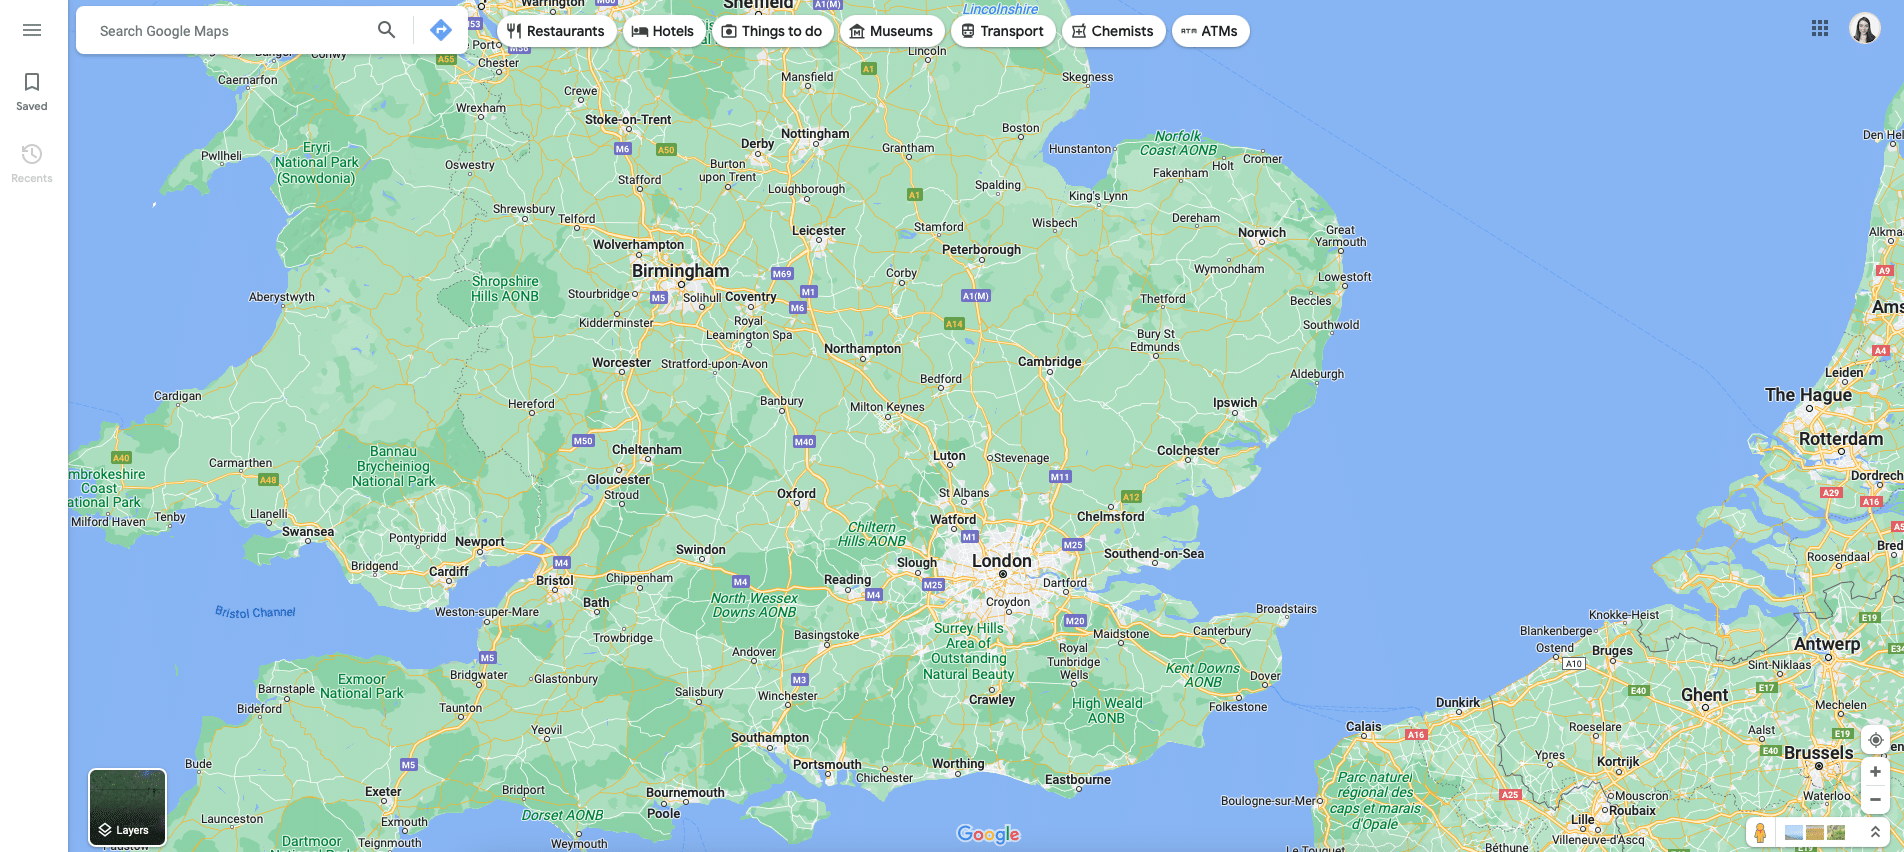 What are the pros and cons of using Google Maps for route optimisation?